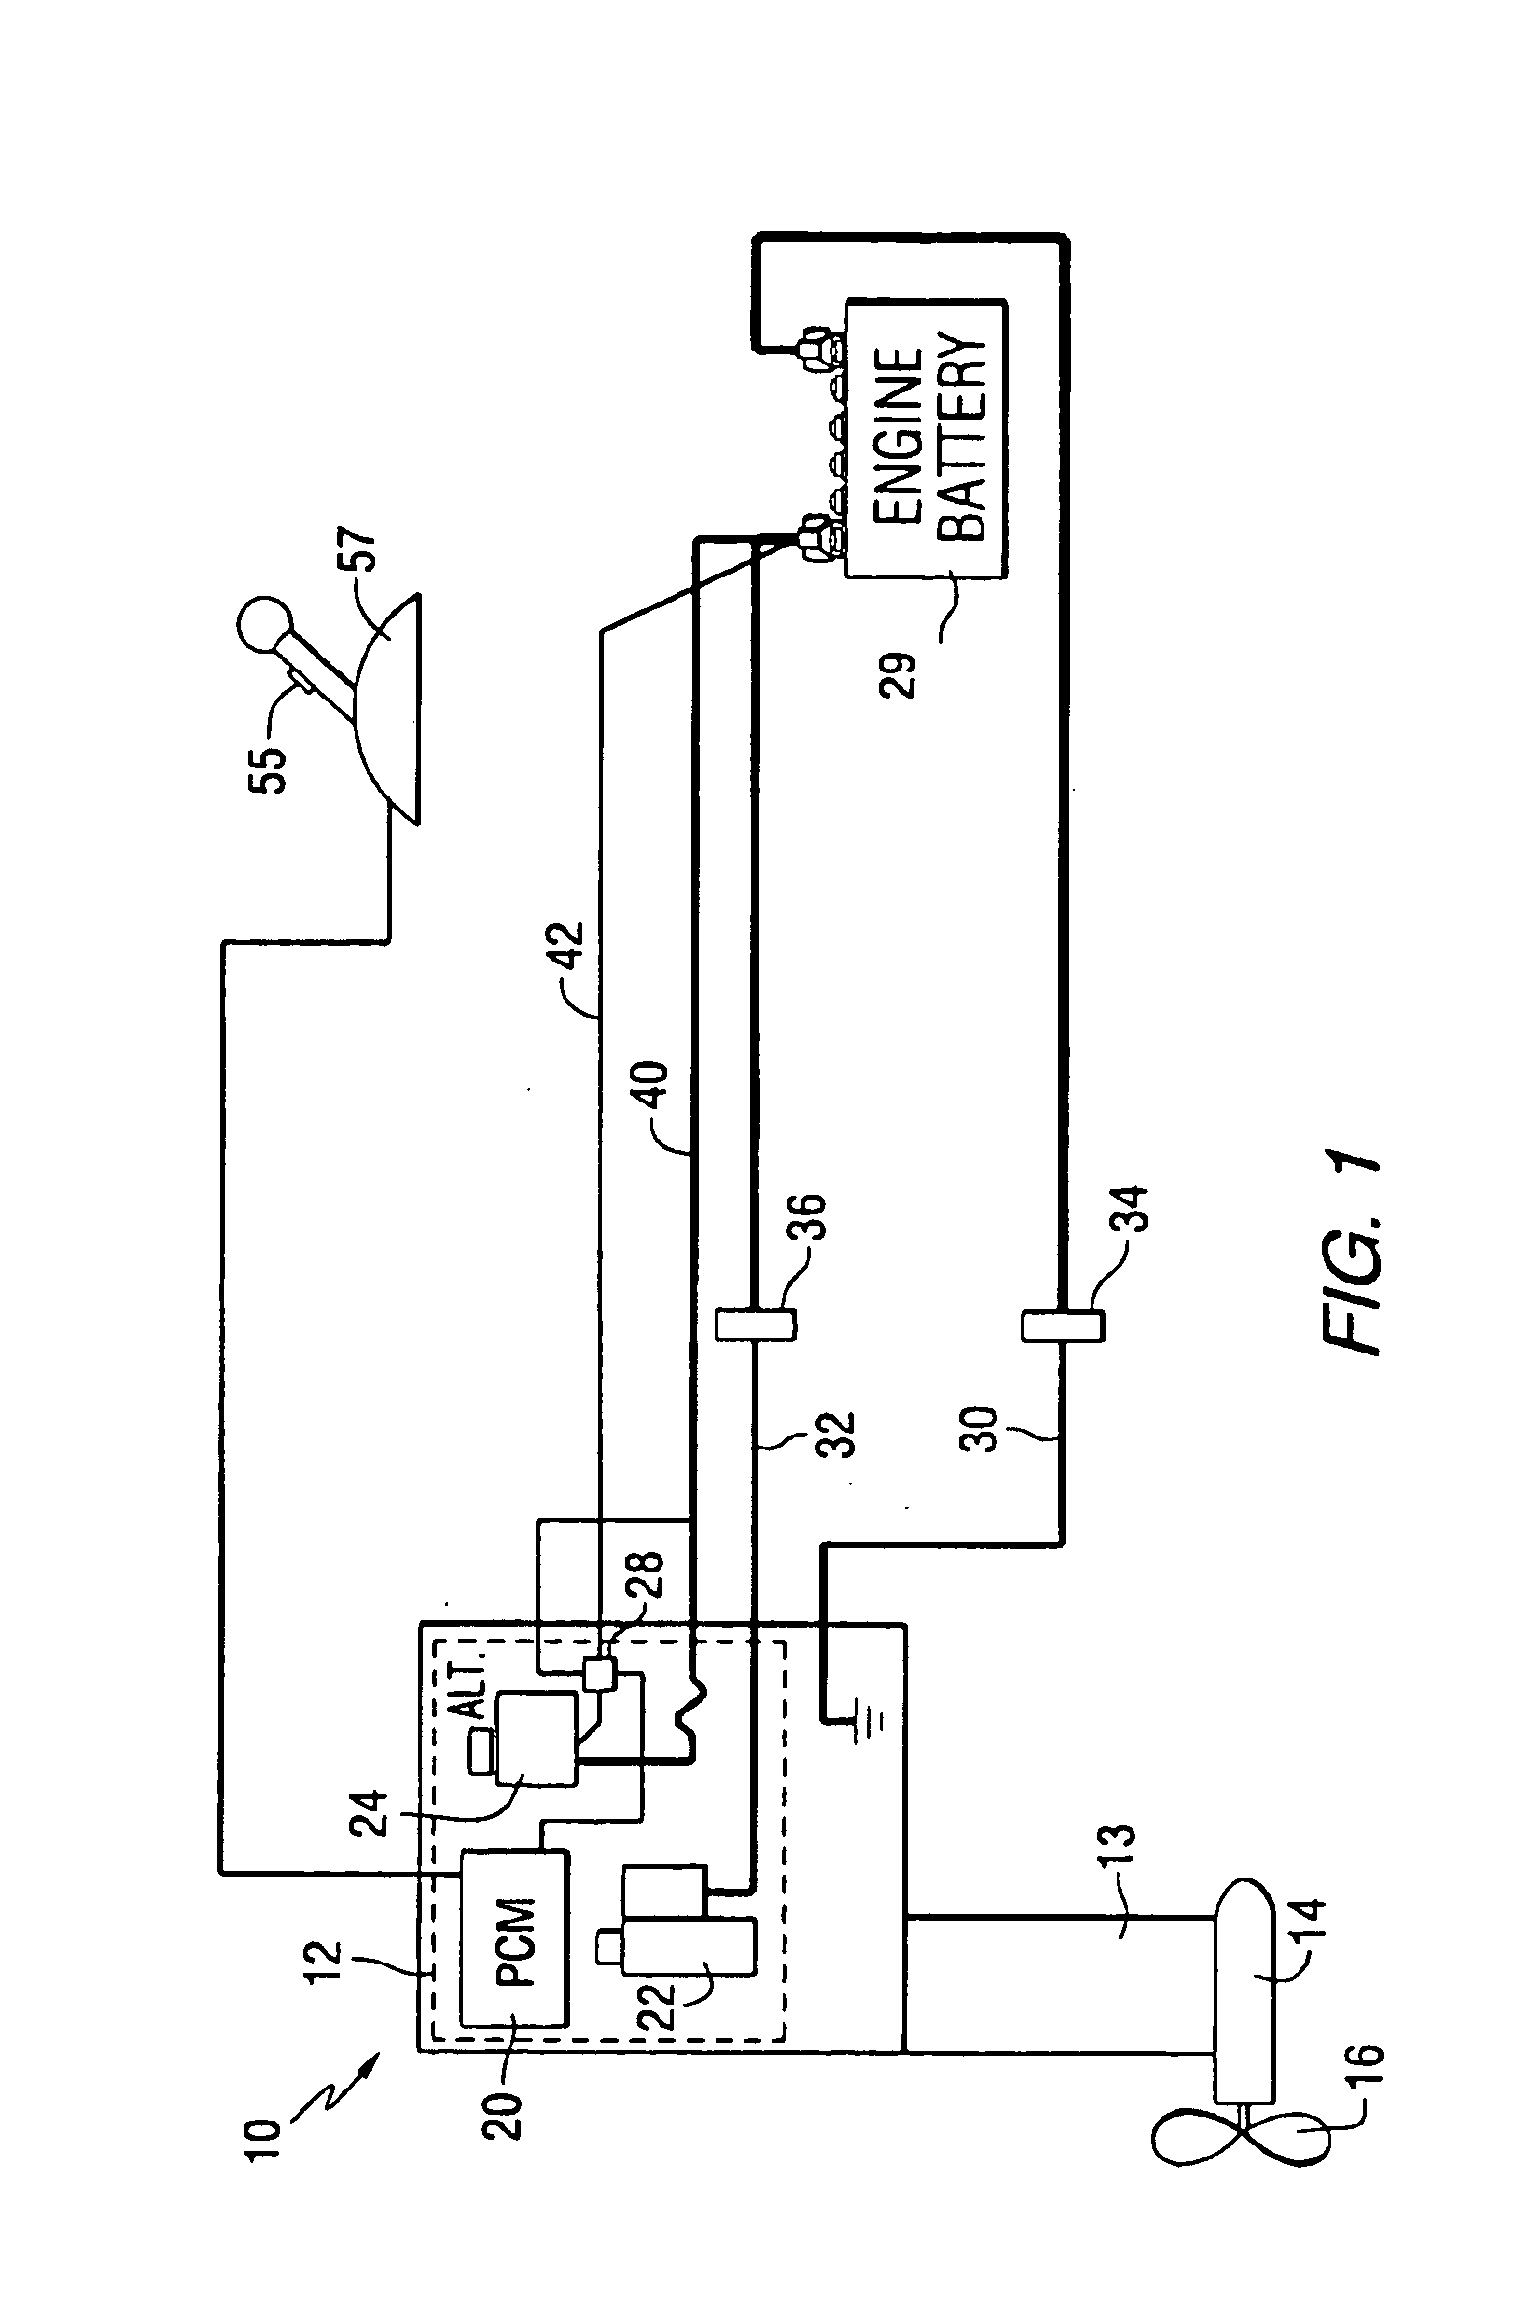 Method for deactivating a marine alternator during periods of high engine power requirements